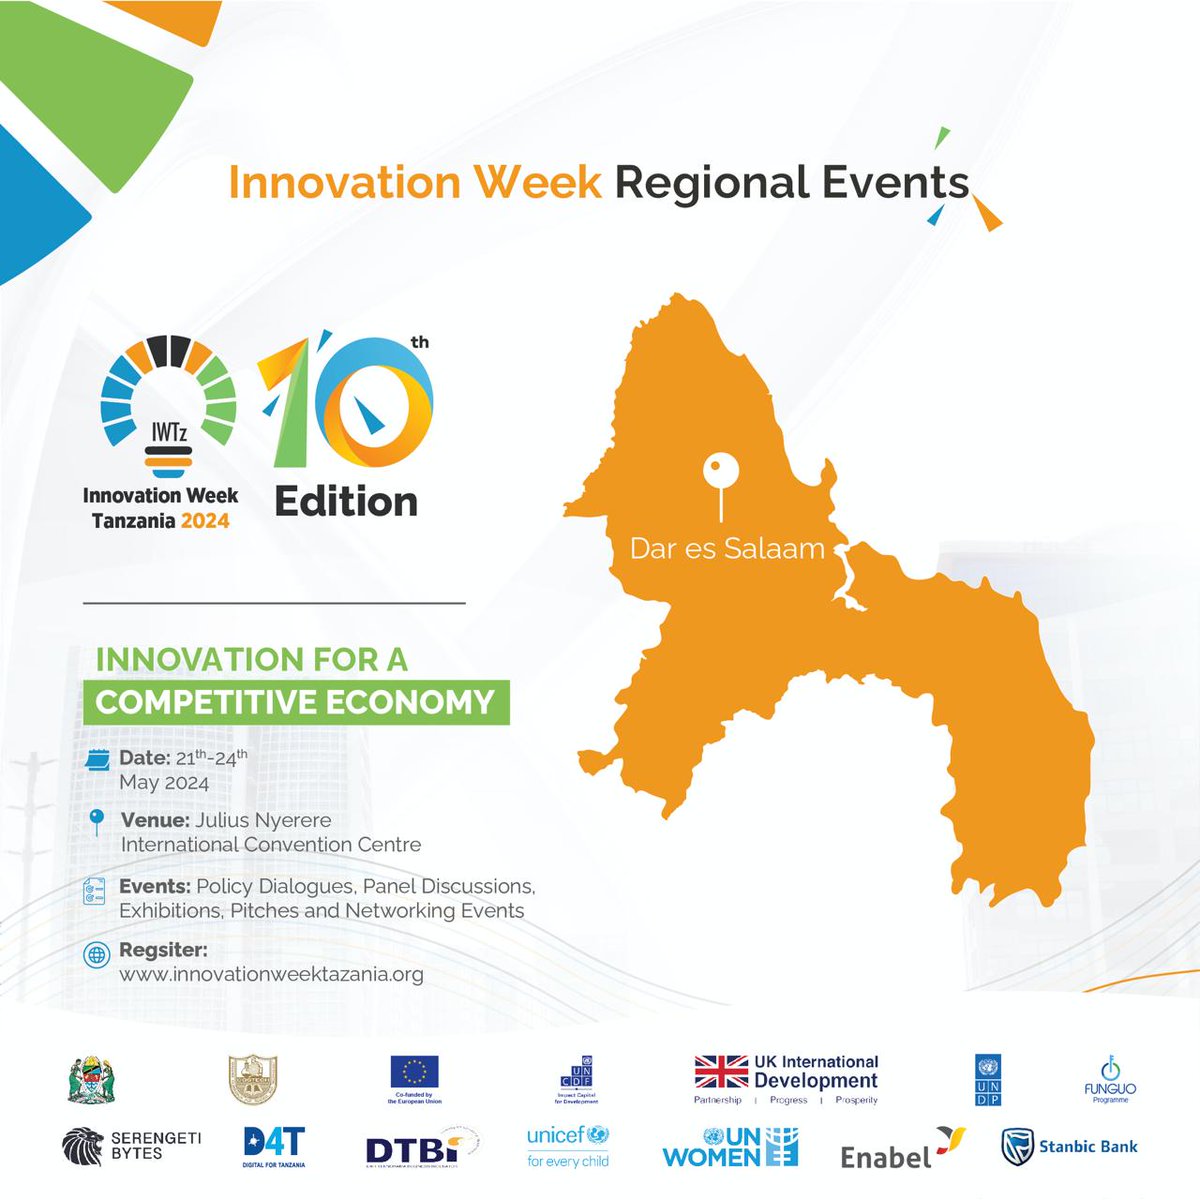 Innovation Week Tanzania 2024 will be taking place in Dar es Salaam from May 21st to May 24th, 2024, at the Julius Nyerere International Convention Centre! Come join us for policy dialogues, panel discussions, exhibitions, and networking opportunities! #innovation #IWTz2024